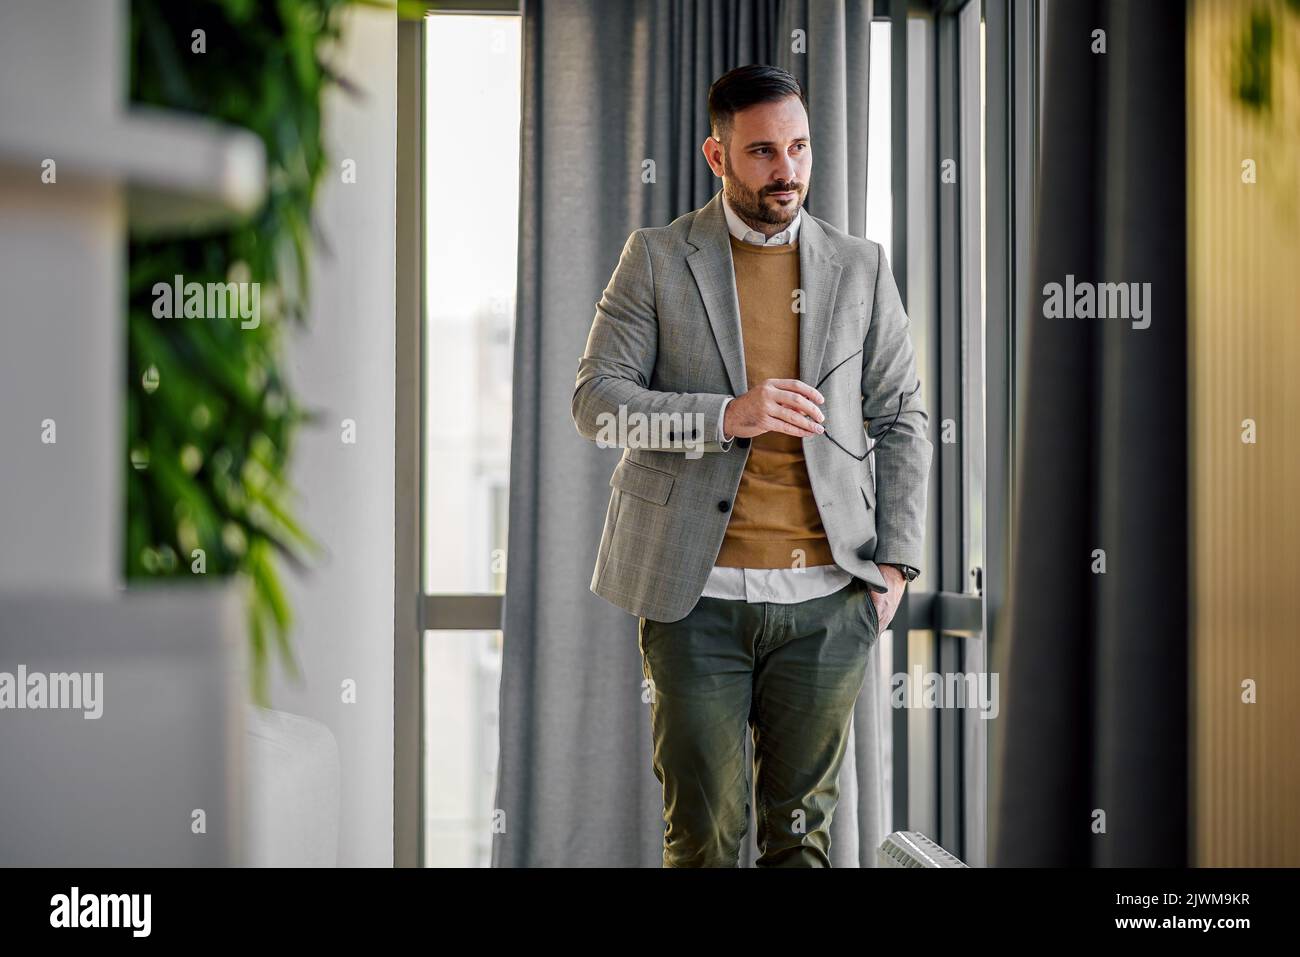 Elegant entrepreneur businessman, taking a stroll through his office, carrying his glasses, stylish. Stock Photo